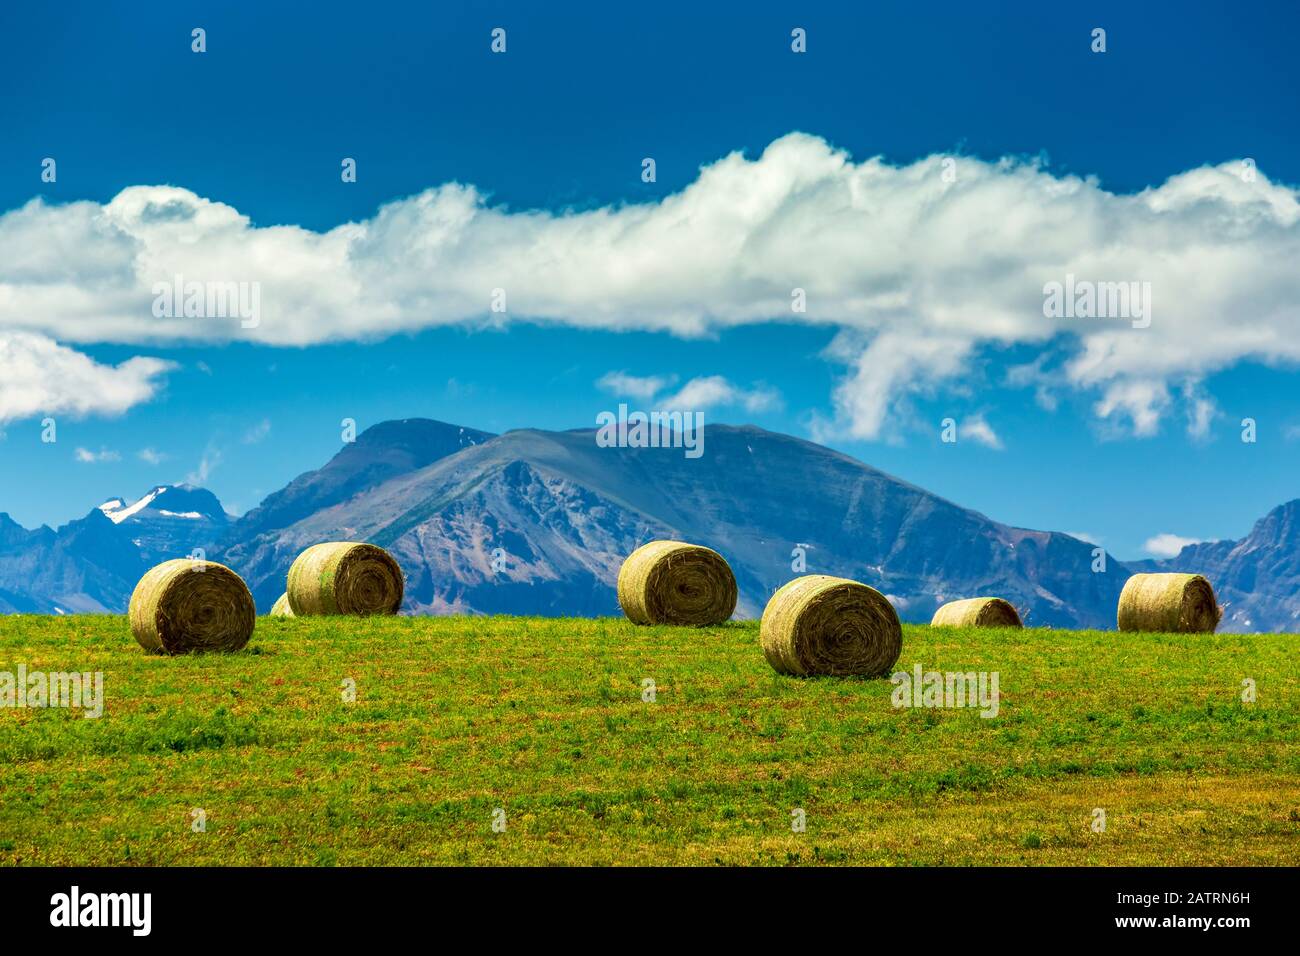 Hay bales on a hillside field with mountain range, clouds and blue sky in the background, near Waterton; Alberta, Canada Stock Photo